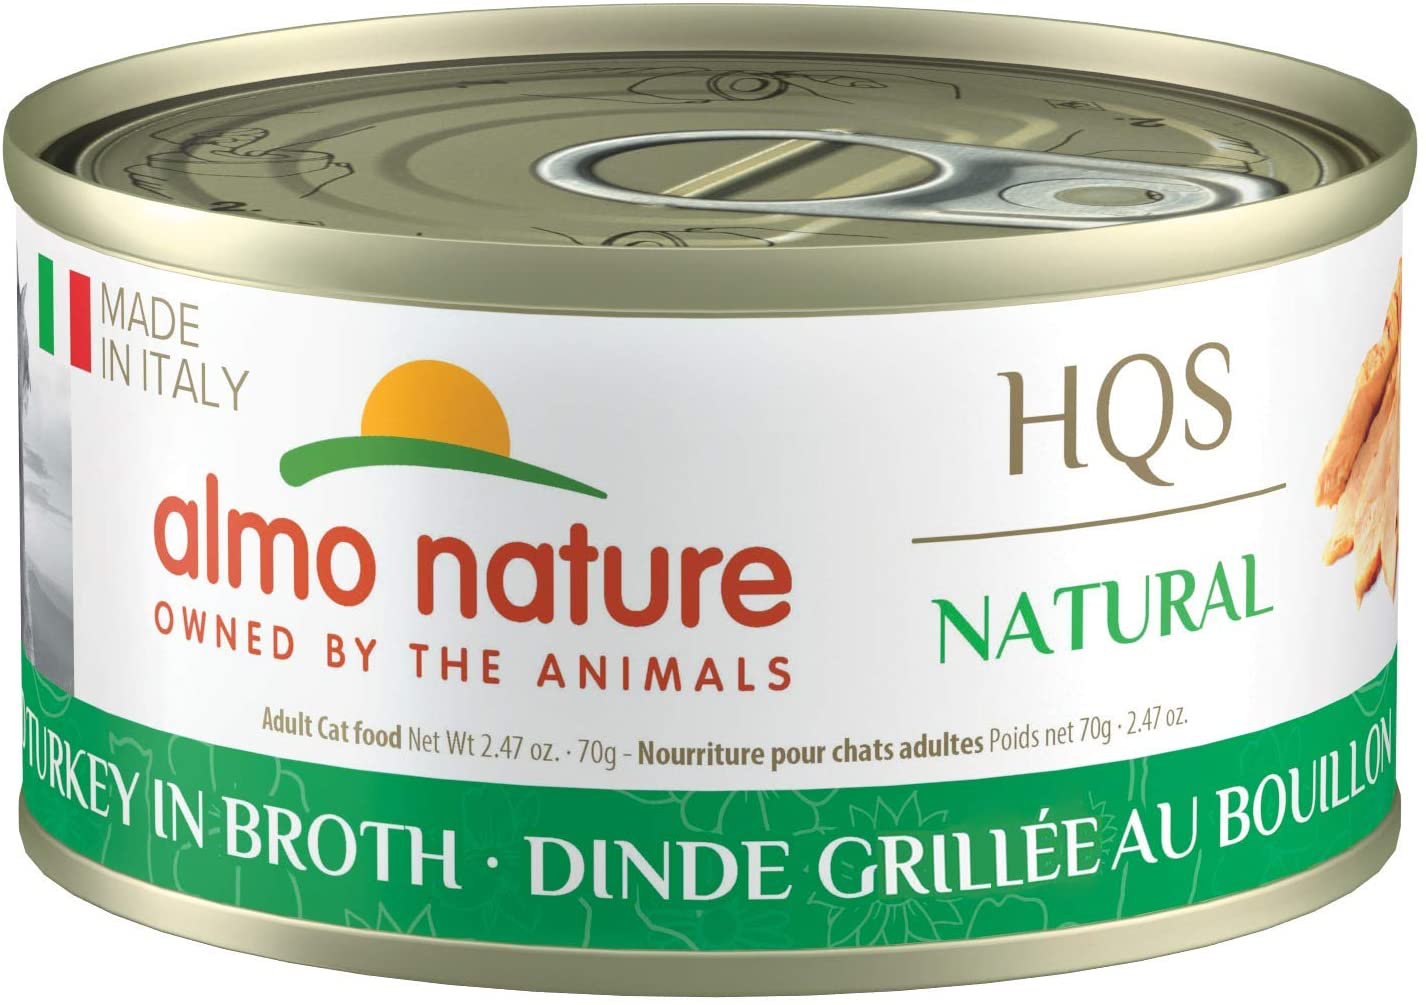 Almo Nature HQS Natural Made in Italy, Grain-Free, Additive Free, Adult Cat Canned Wet Food. Crafted with a Taste of Italy in Every Bite (Pack of 24)